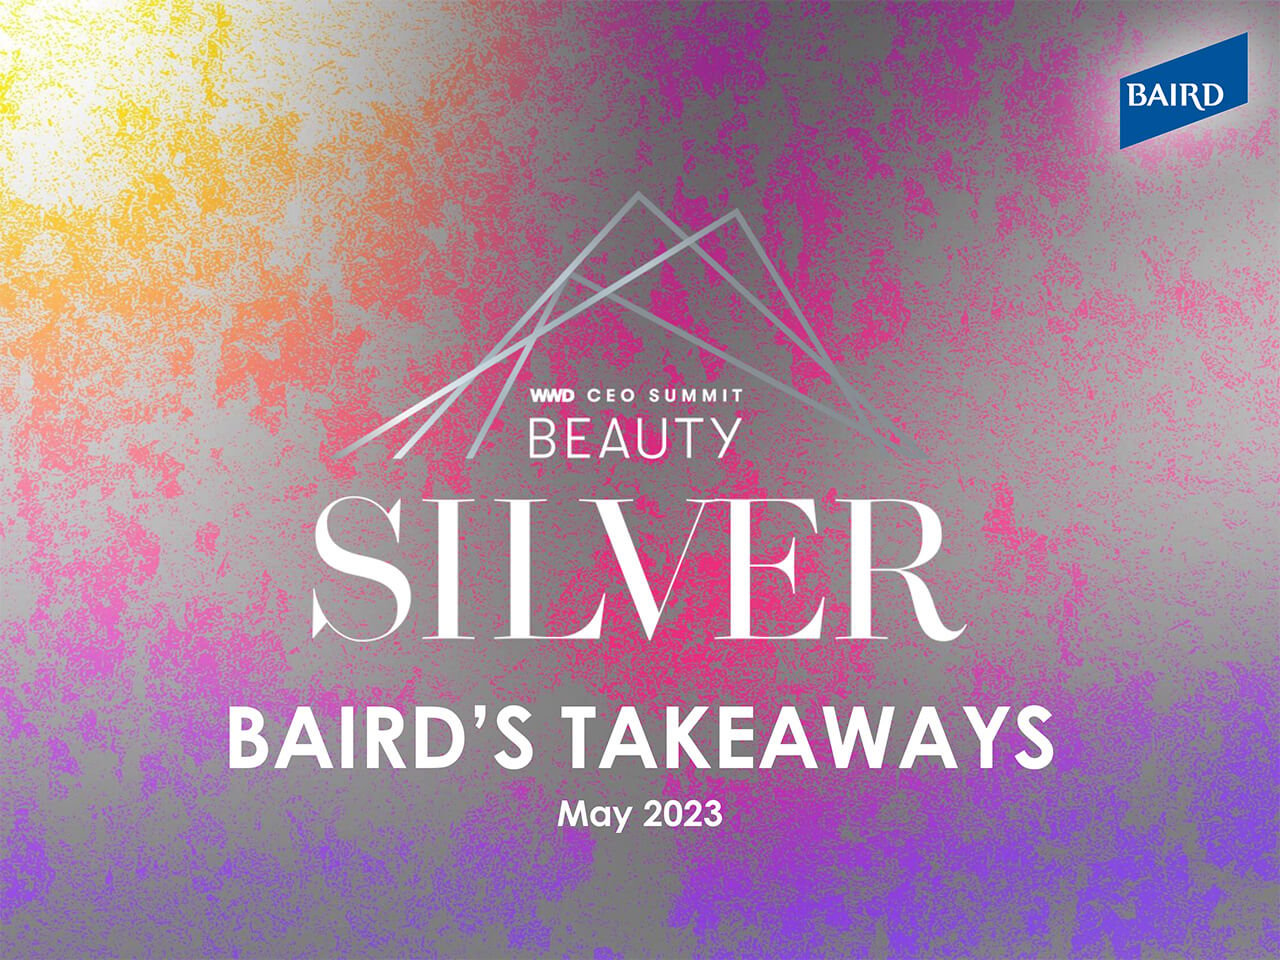 Cover image of Baird's Takeaways from the 25th WWD Beauty CEO Summit